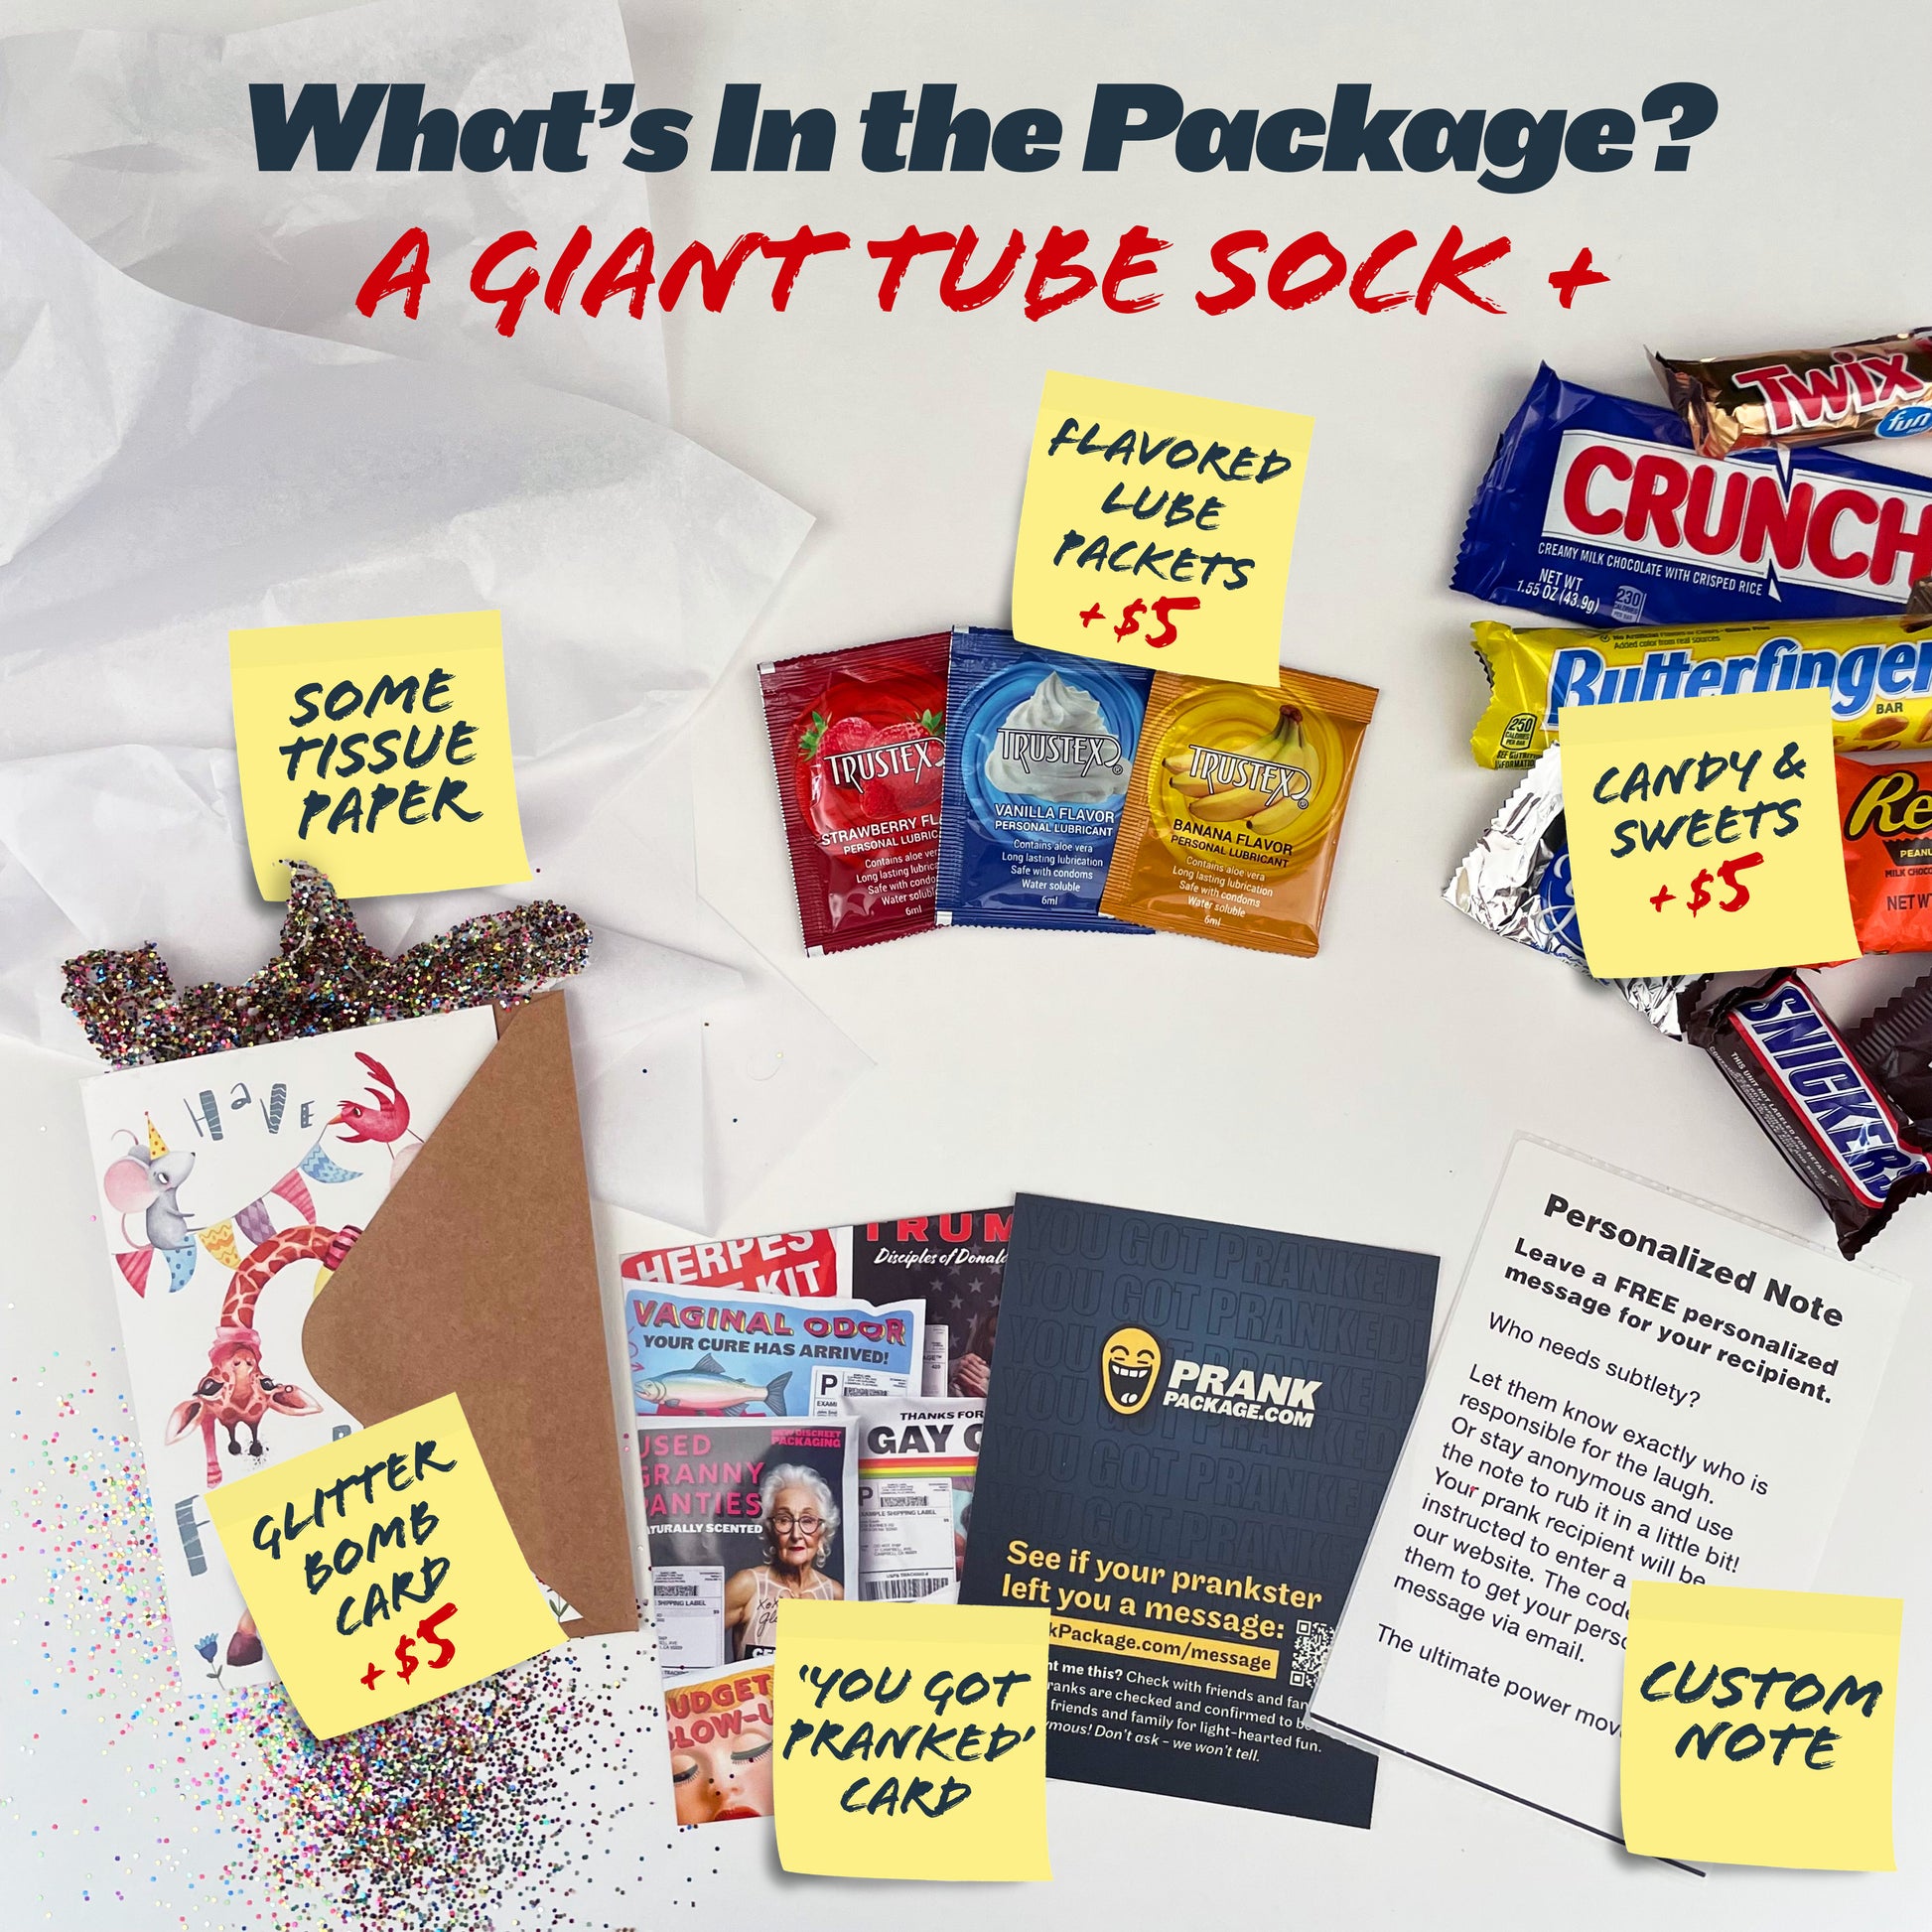 What's inside the package? A GIANT tube sock! Plus some tissue paper, a 'You Got Pranked' card, a personalized note for your recipient, optional glitter bomb card, optional flavored lube packets, and optional candy.